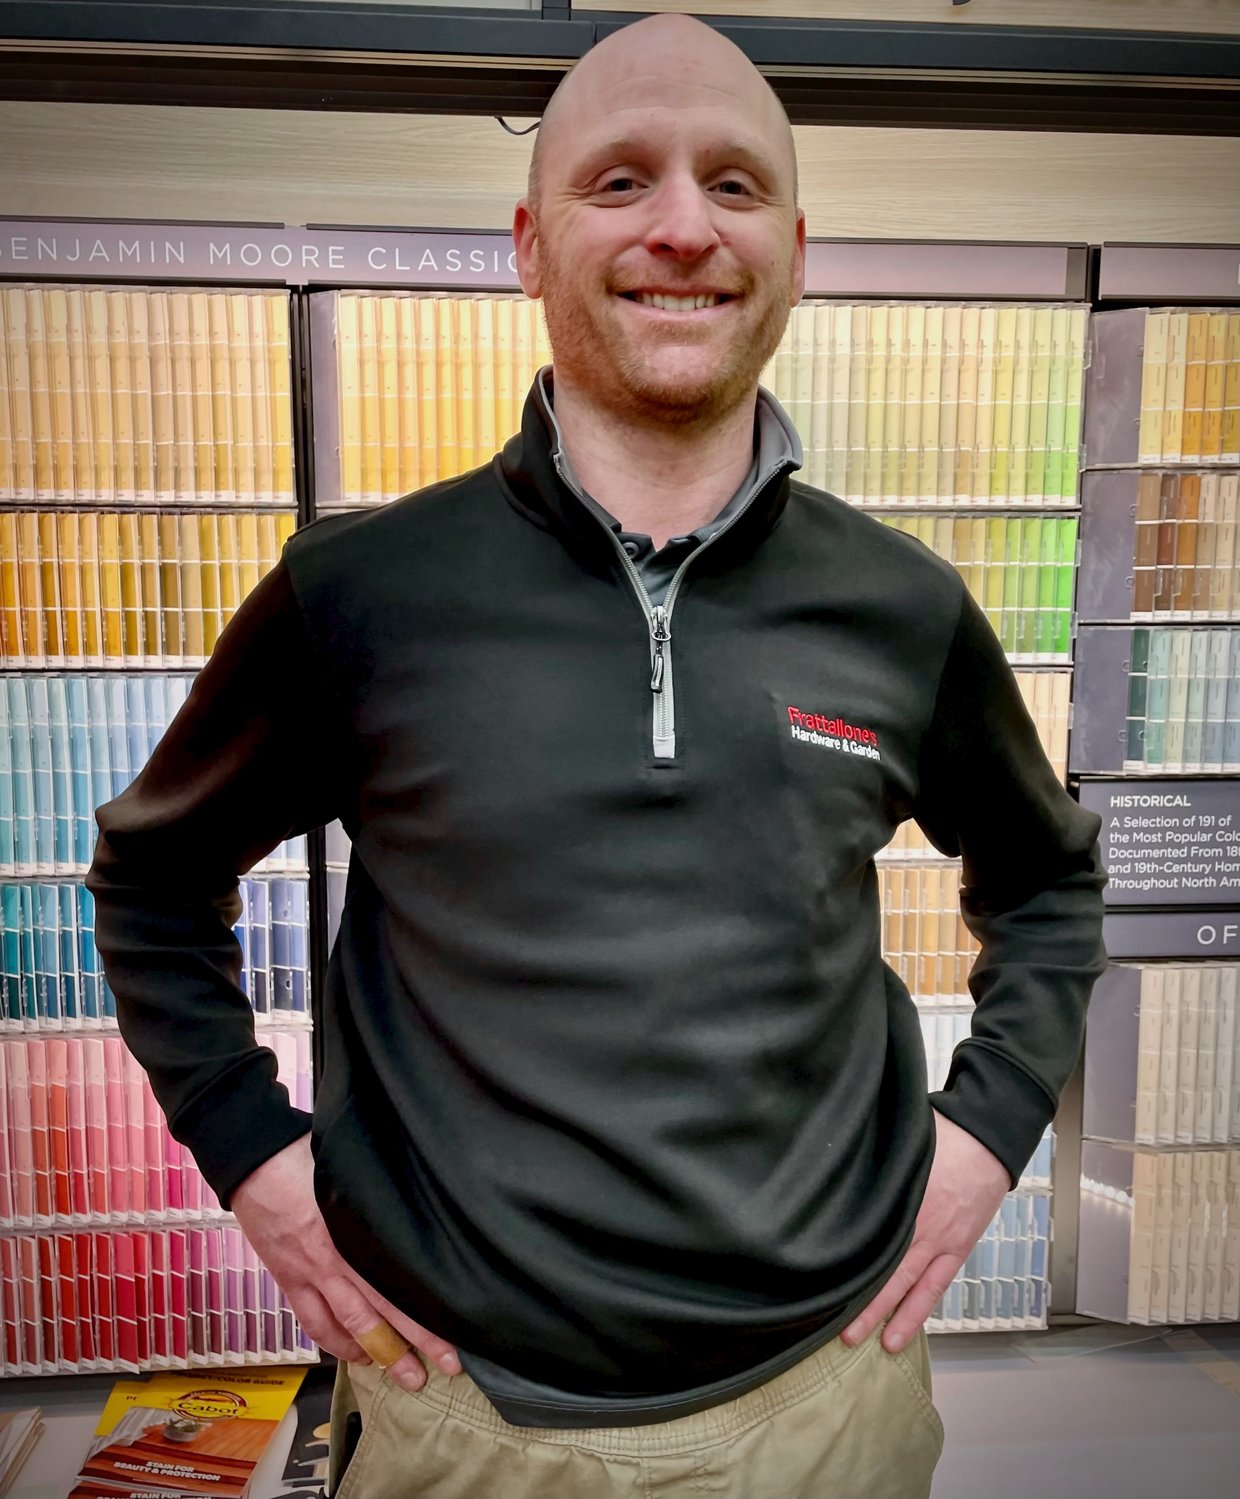 Luke Kabat is the assistant manager at Frattallone’s Como Avenue store, one of their many Twin Cities locations. Local stores carry items that can keep folks warmer this winter. (Photo by Susan Schaefer)